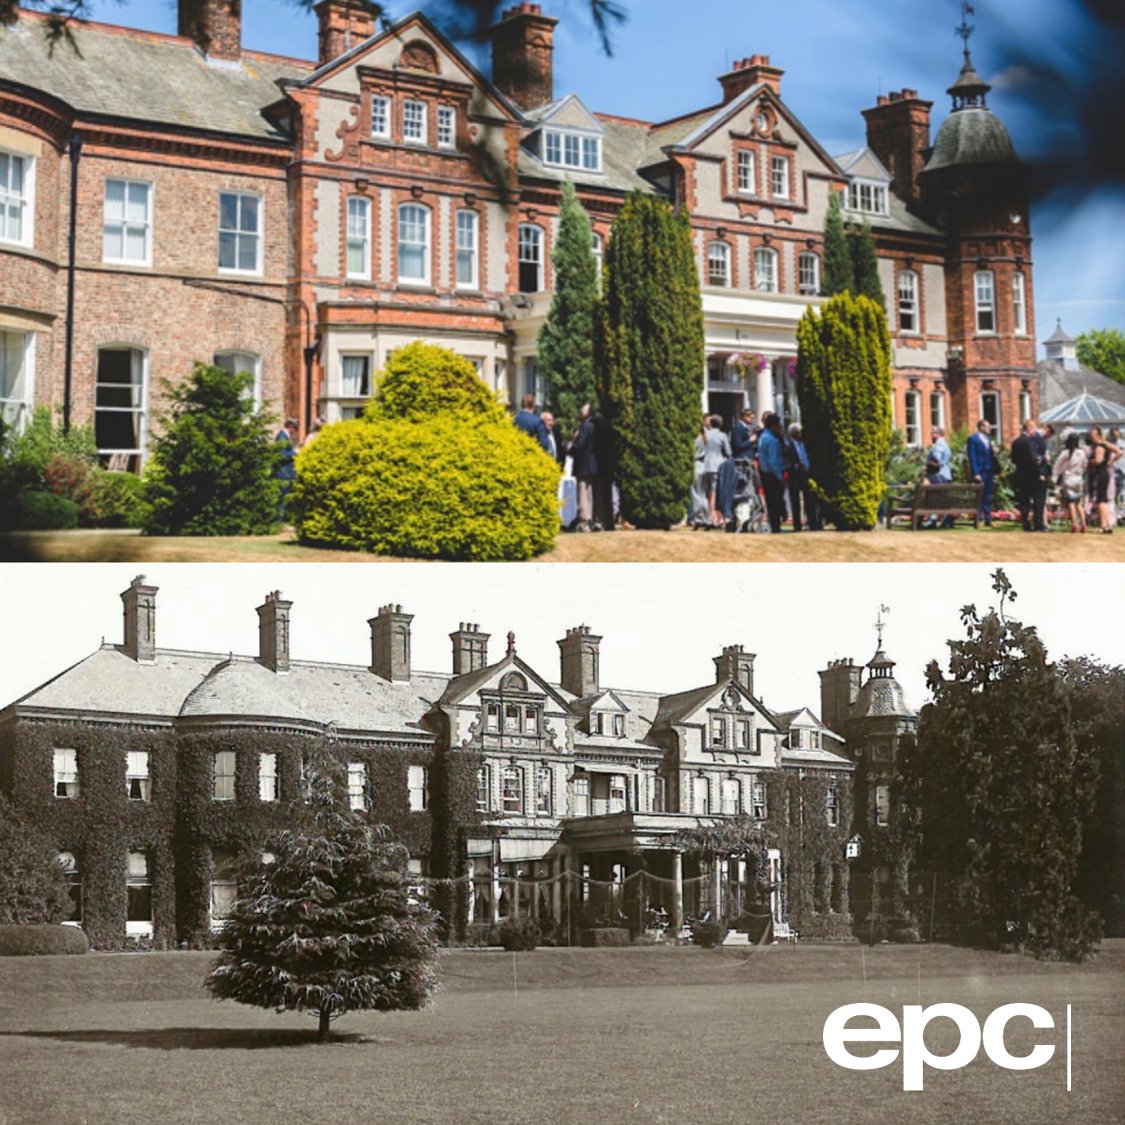 Historic Hawkhills📜 We are proud of our EPC site, The beautiful Hawkhills is steeped in history and our heritage goes far back. From being a previous Anti-Gas School prior to WWII to a Police Training School at the end of it. Find out more…. epcresilience.com/about-us/herit…